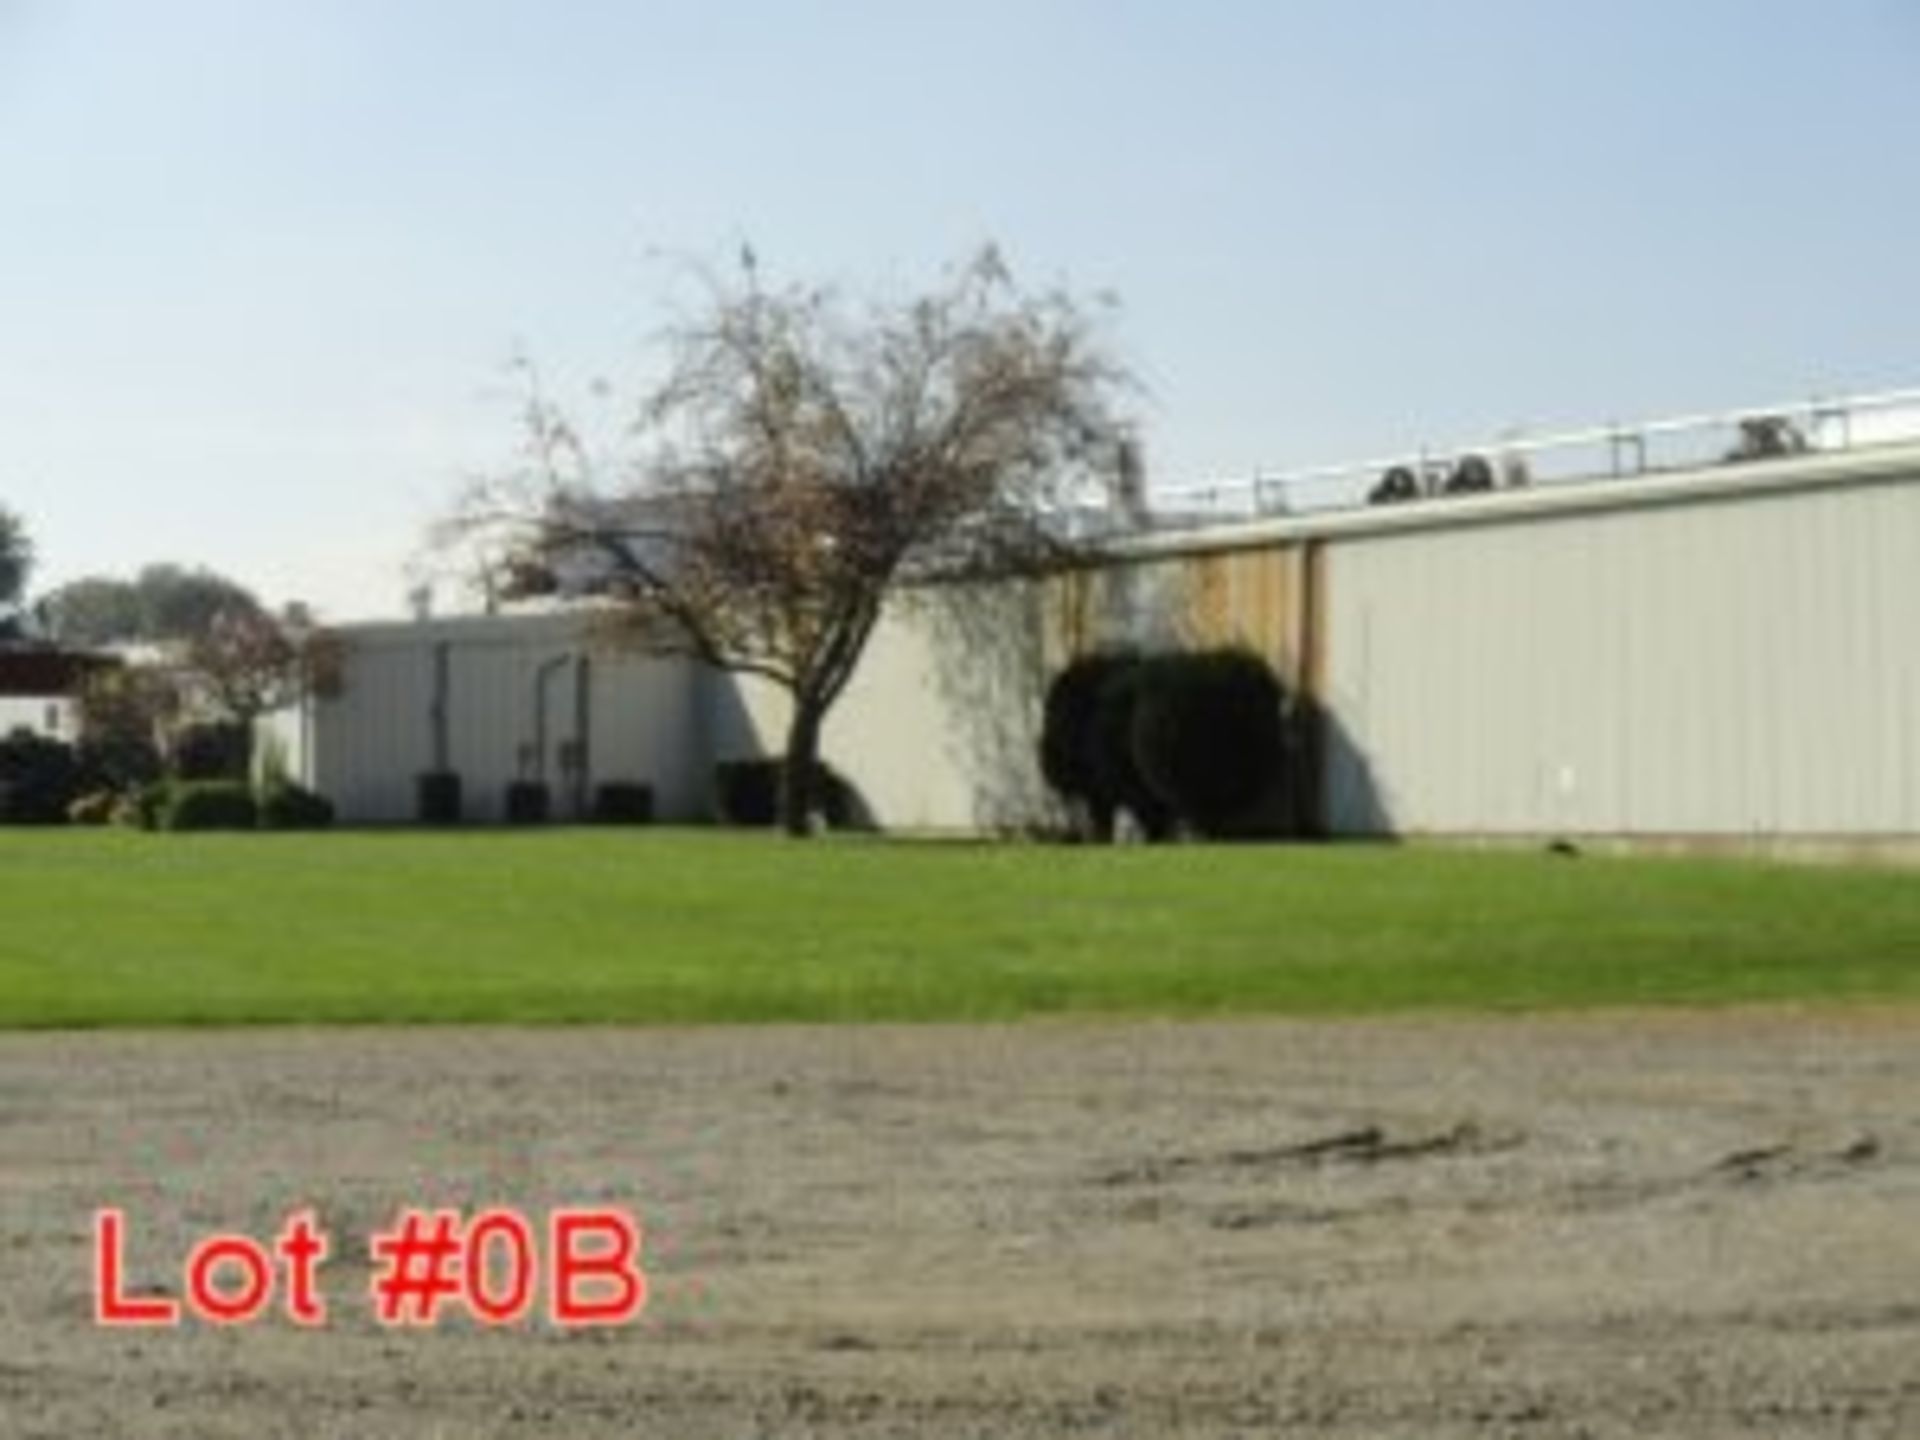 REAL PROPERTY ONLY: HIS LOT INCLUDES THE REAL PROPERTY LOCATED AT 900 NORTH CENTER ST. VERSAILLES OH - Image 5 of 6